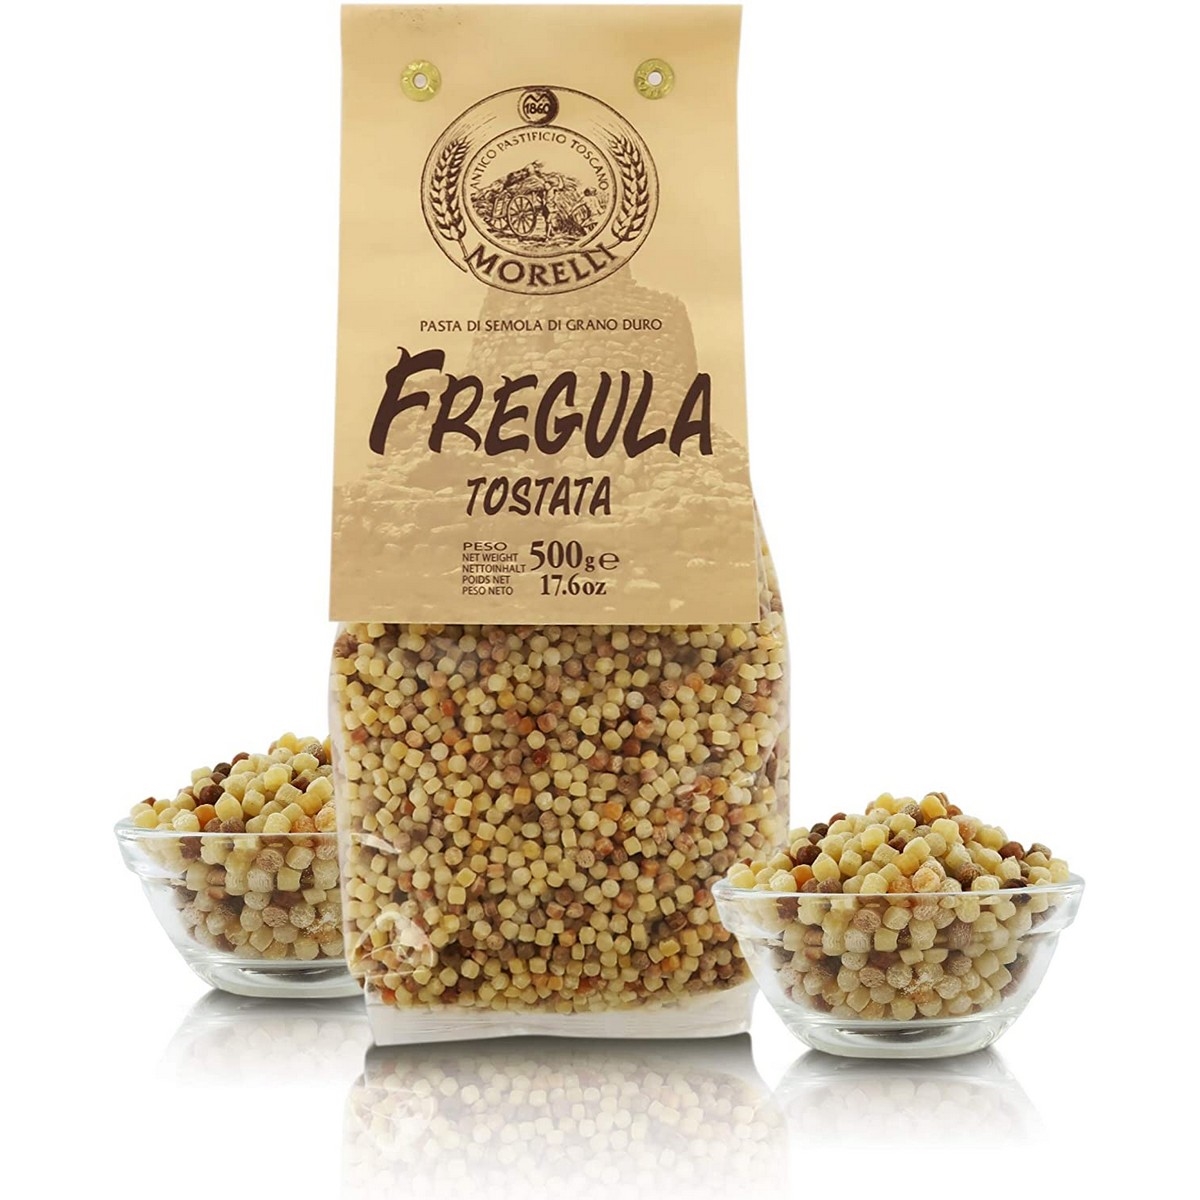 regional typical products - toasted fregula - 500 g